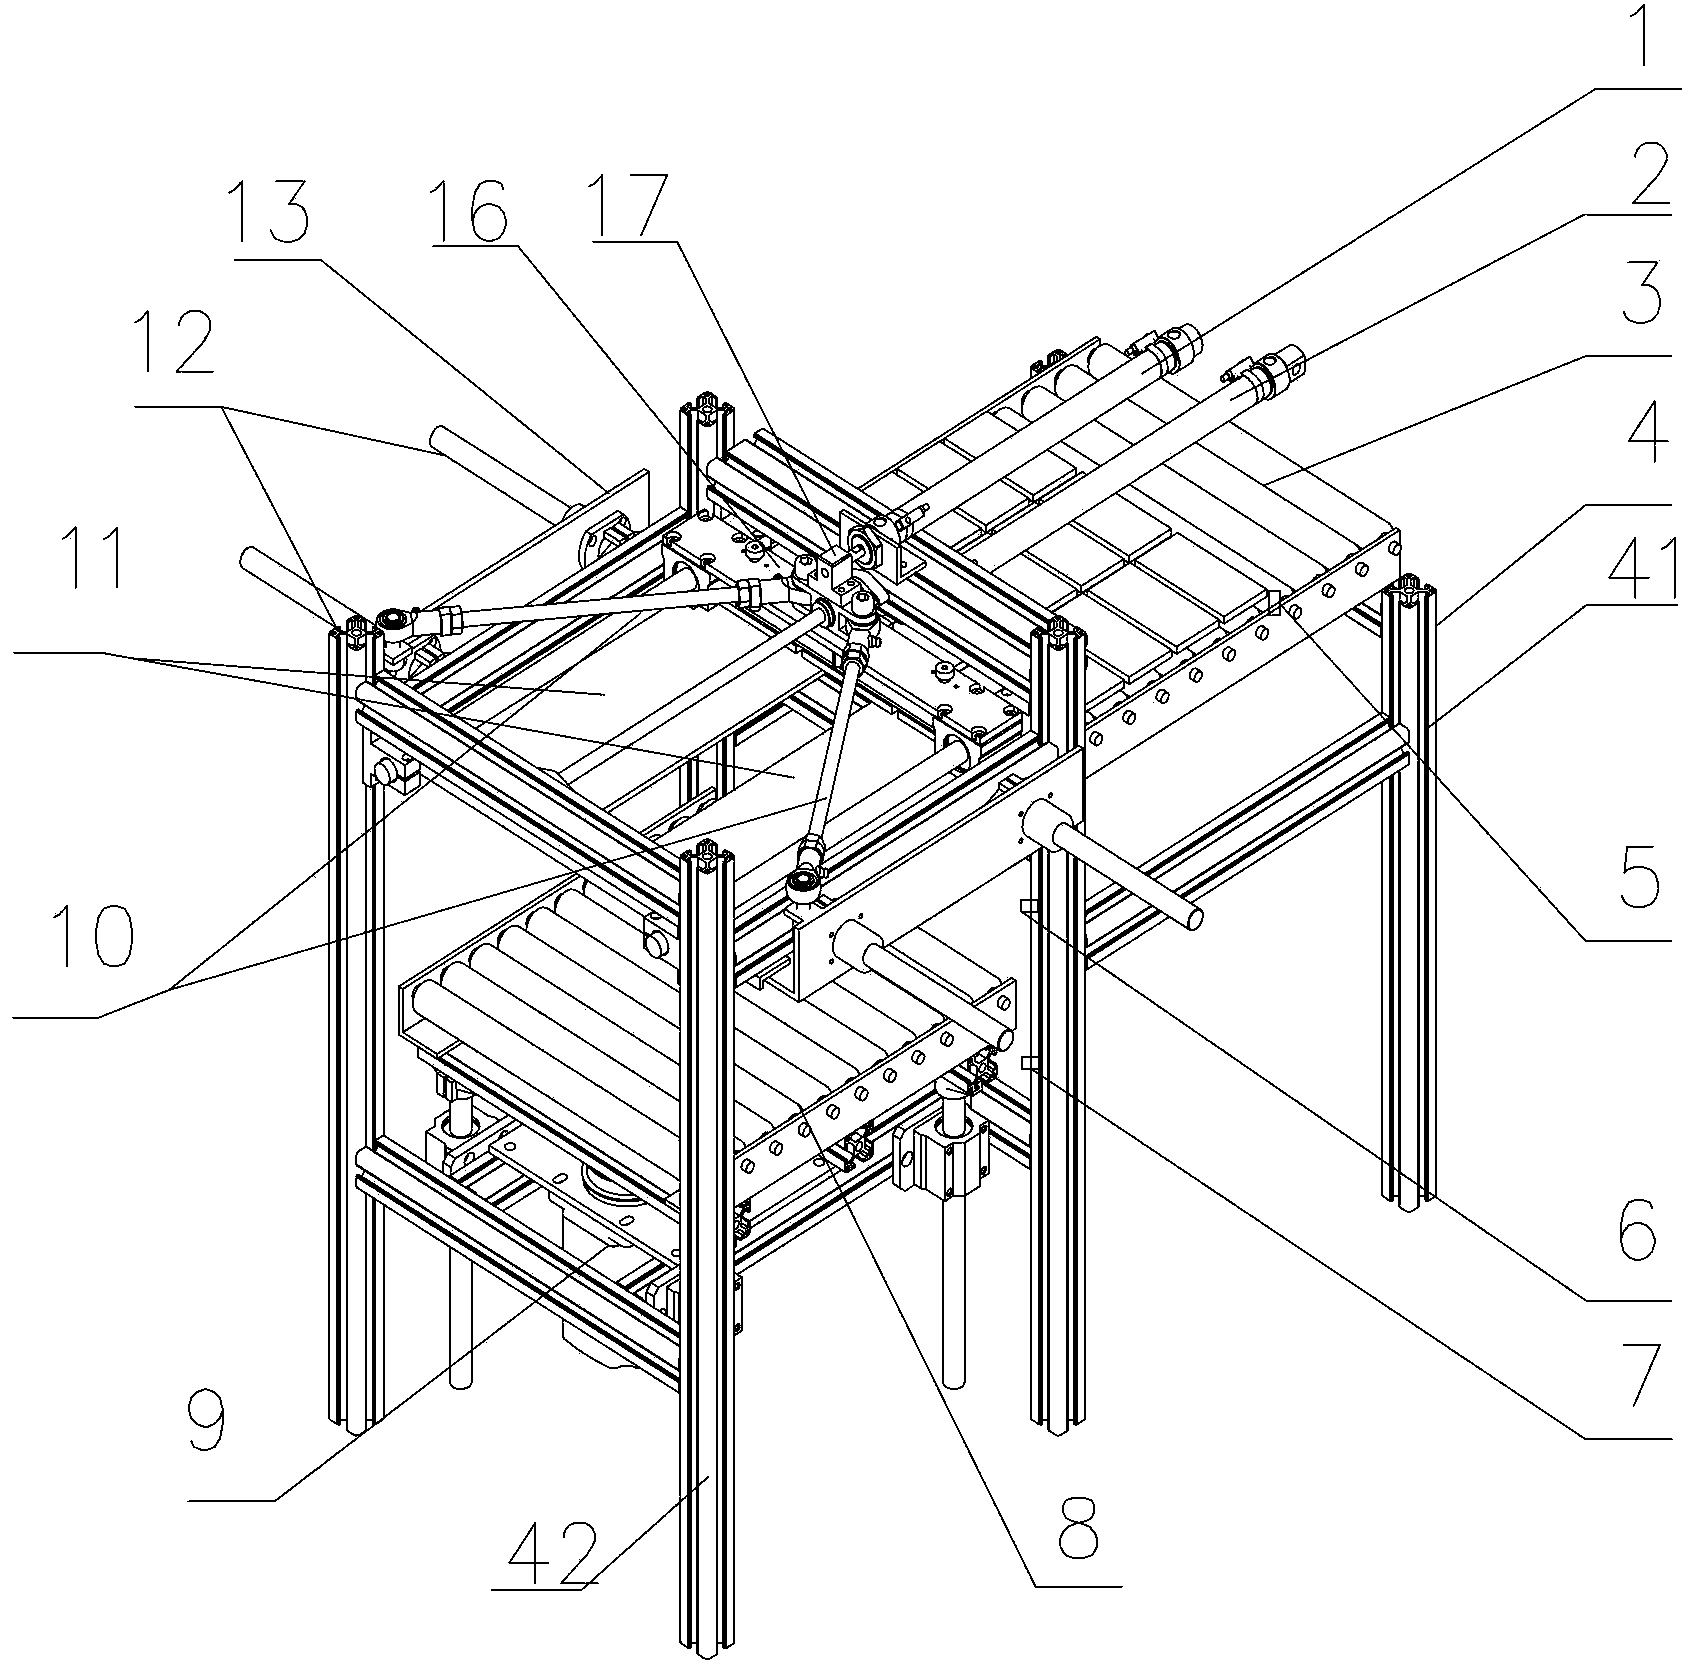 Piler for small tile package and control method